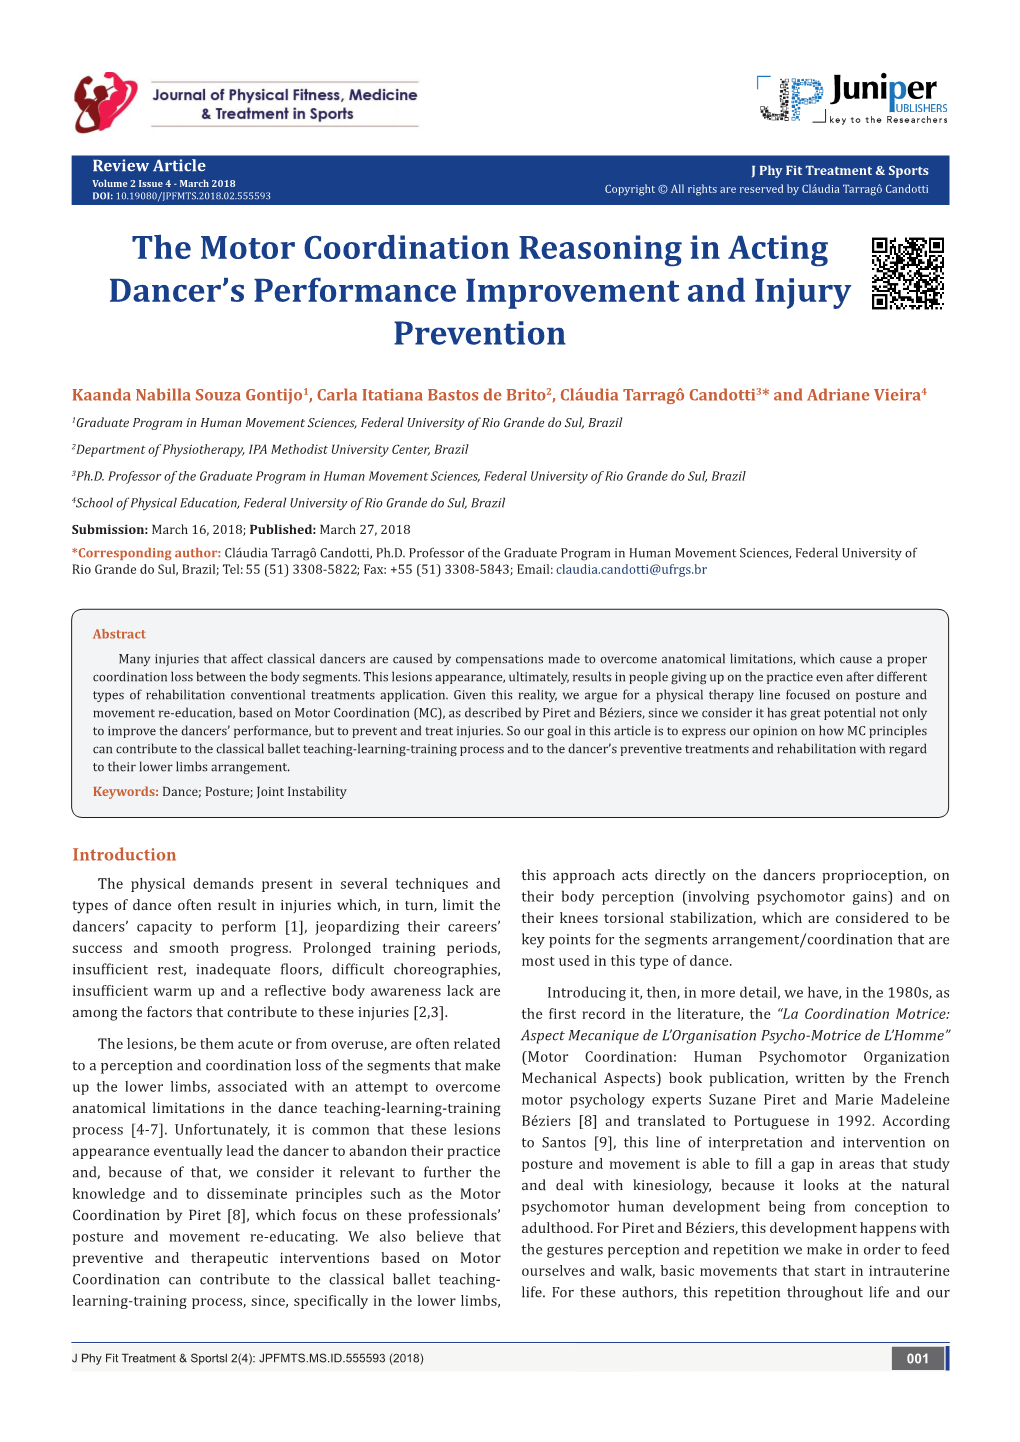 The Motor Coordination Reasoning in Acting Dancer's Performance